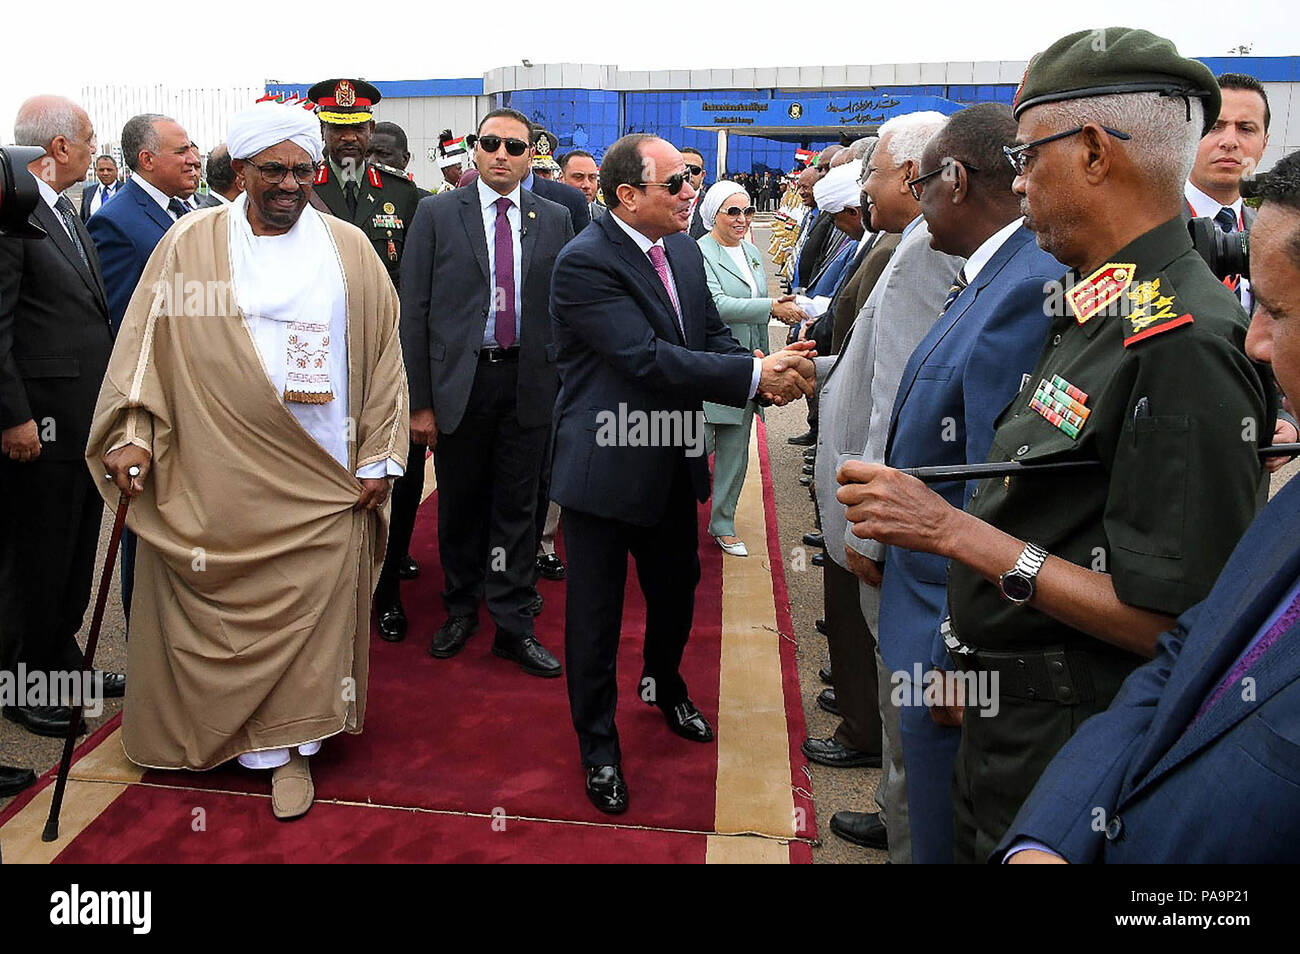 Khartoum, Sudan - 19-20 July 2018 - Egyptian President Abdel Fattah El Sisi makes a 2-day state visit to Sudan for talks with Sudanese President Omar Al Bashir for discussion on bilateral relations and other topics.  (presidential pool photo) Stock Photo